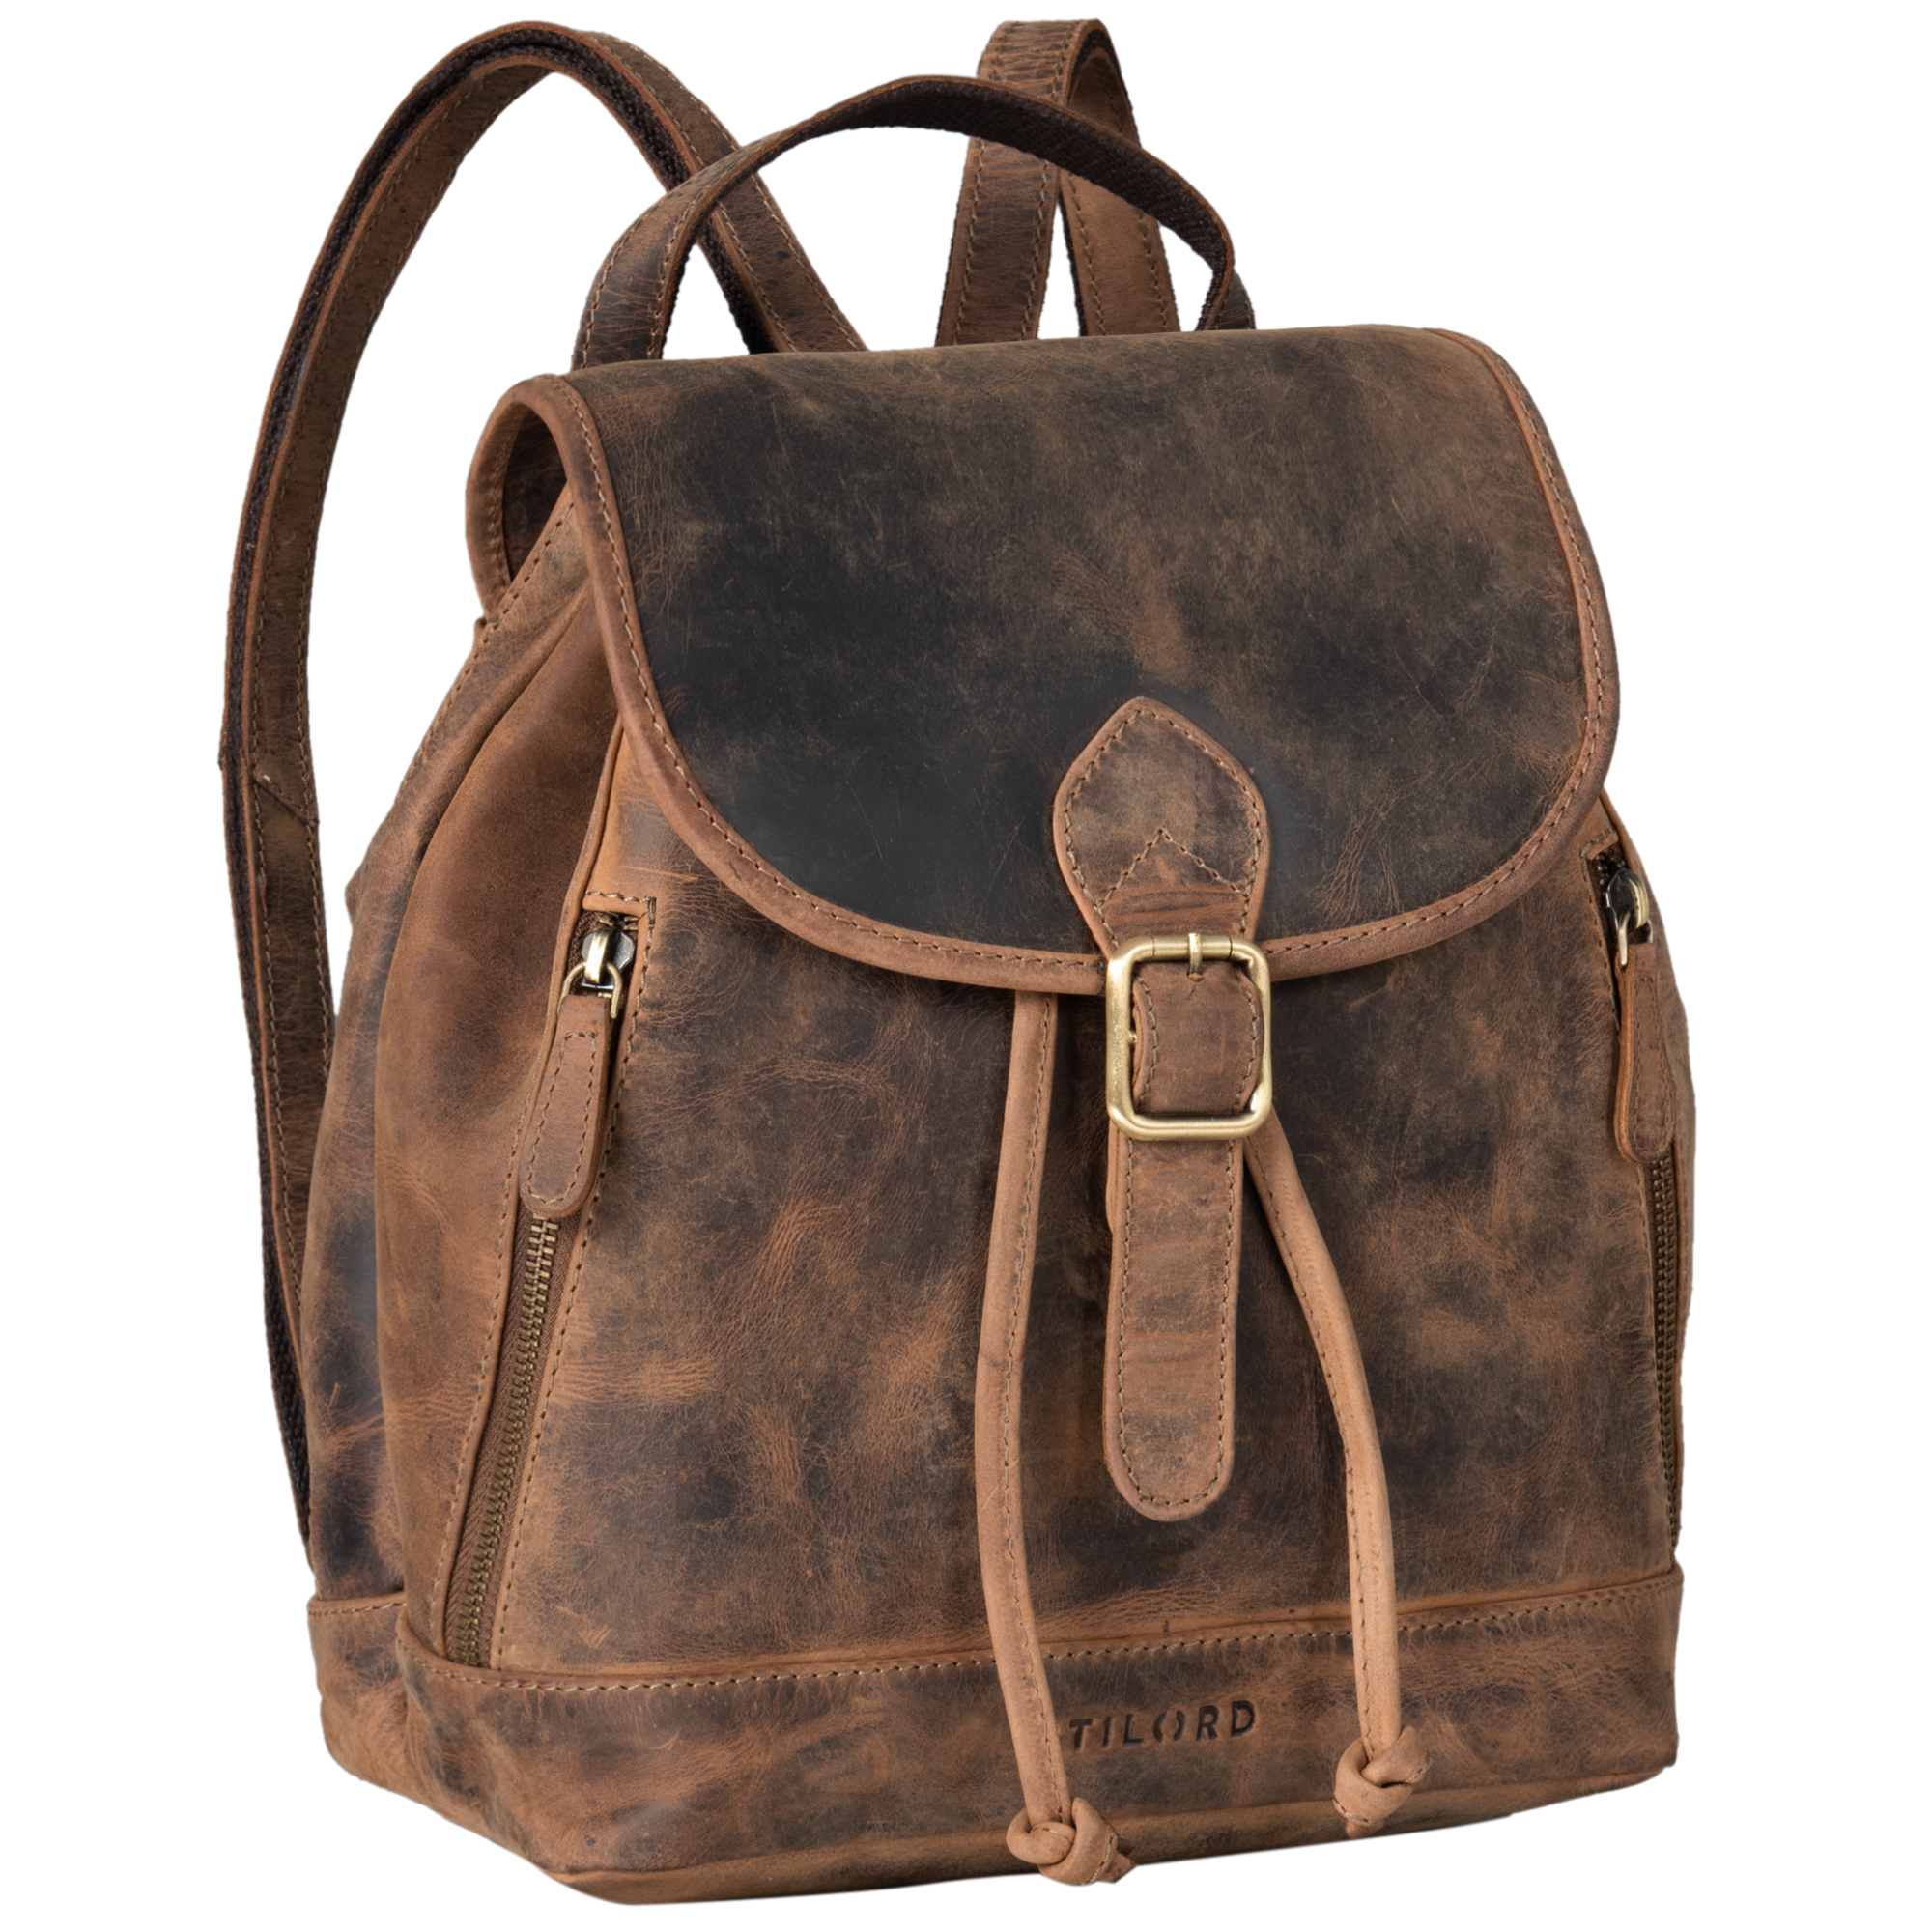 Montsouris MM / GM Suedette Leather Backpack Organizer (More